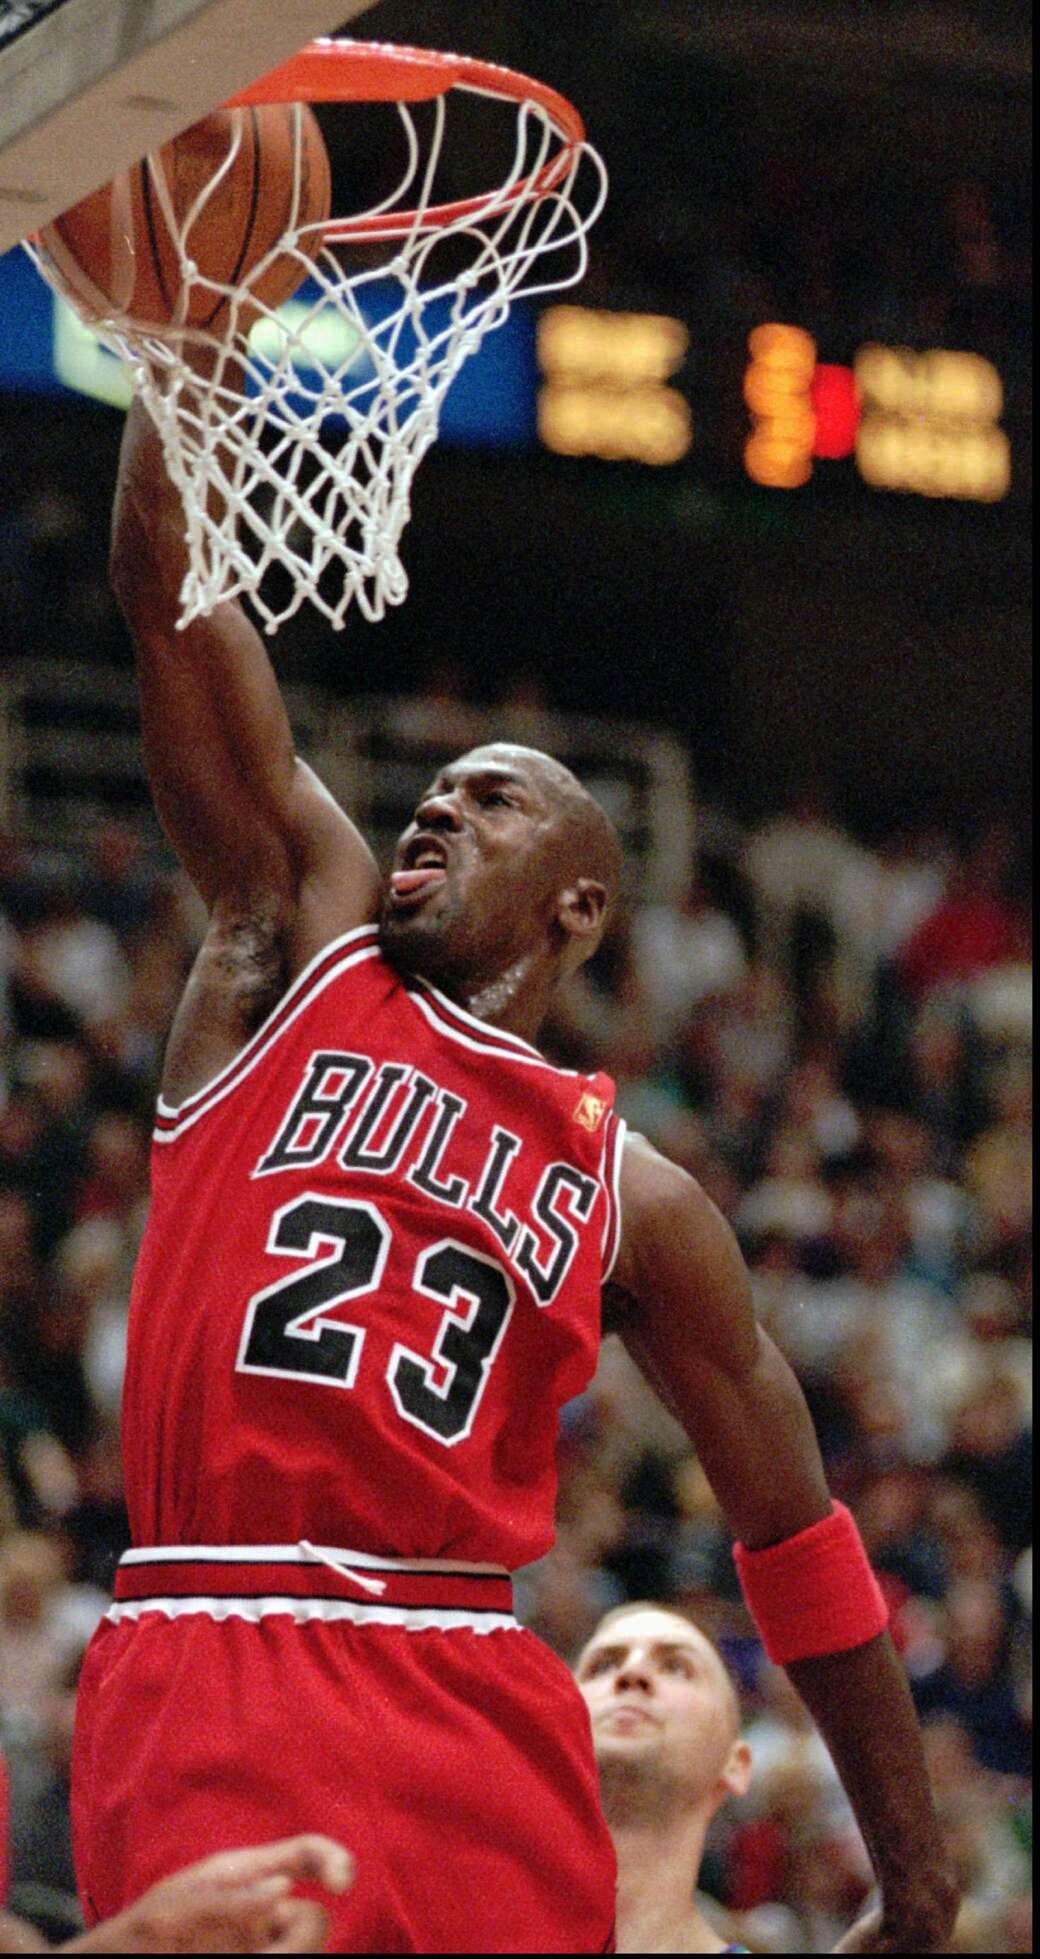 Today in History: March 19, Michael Jordan returns to basketball